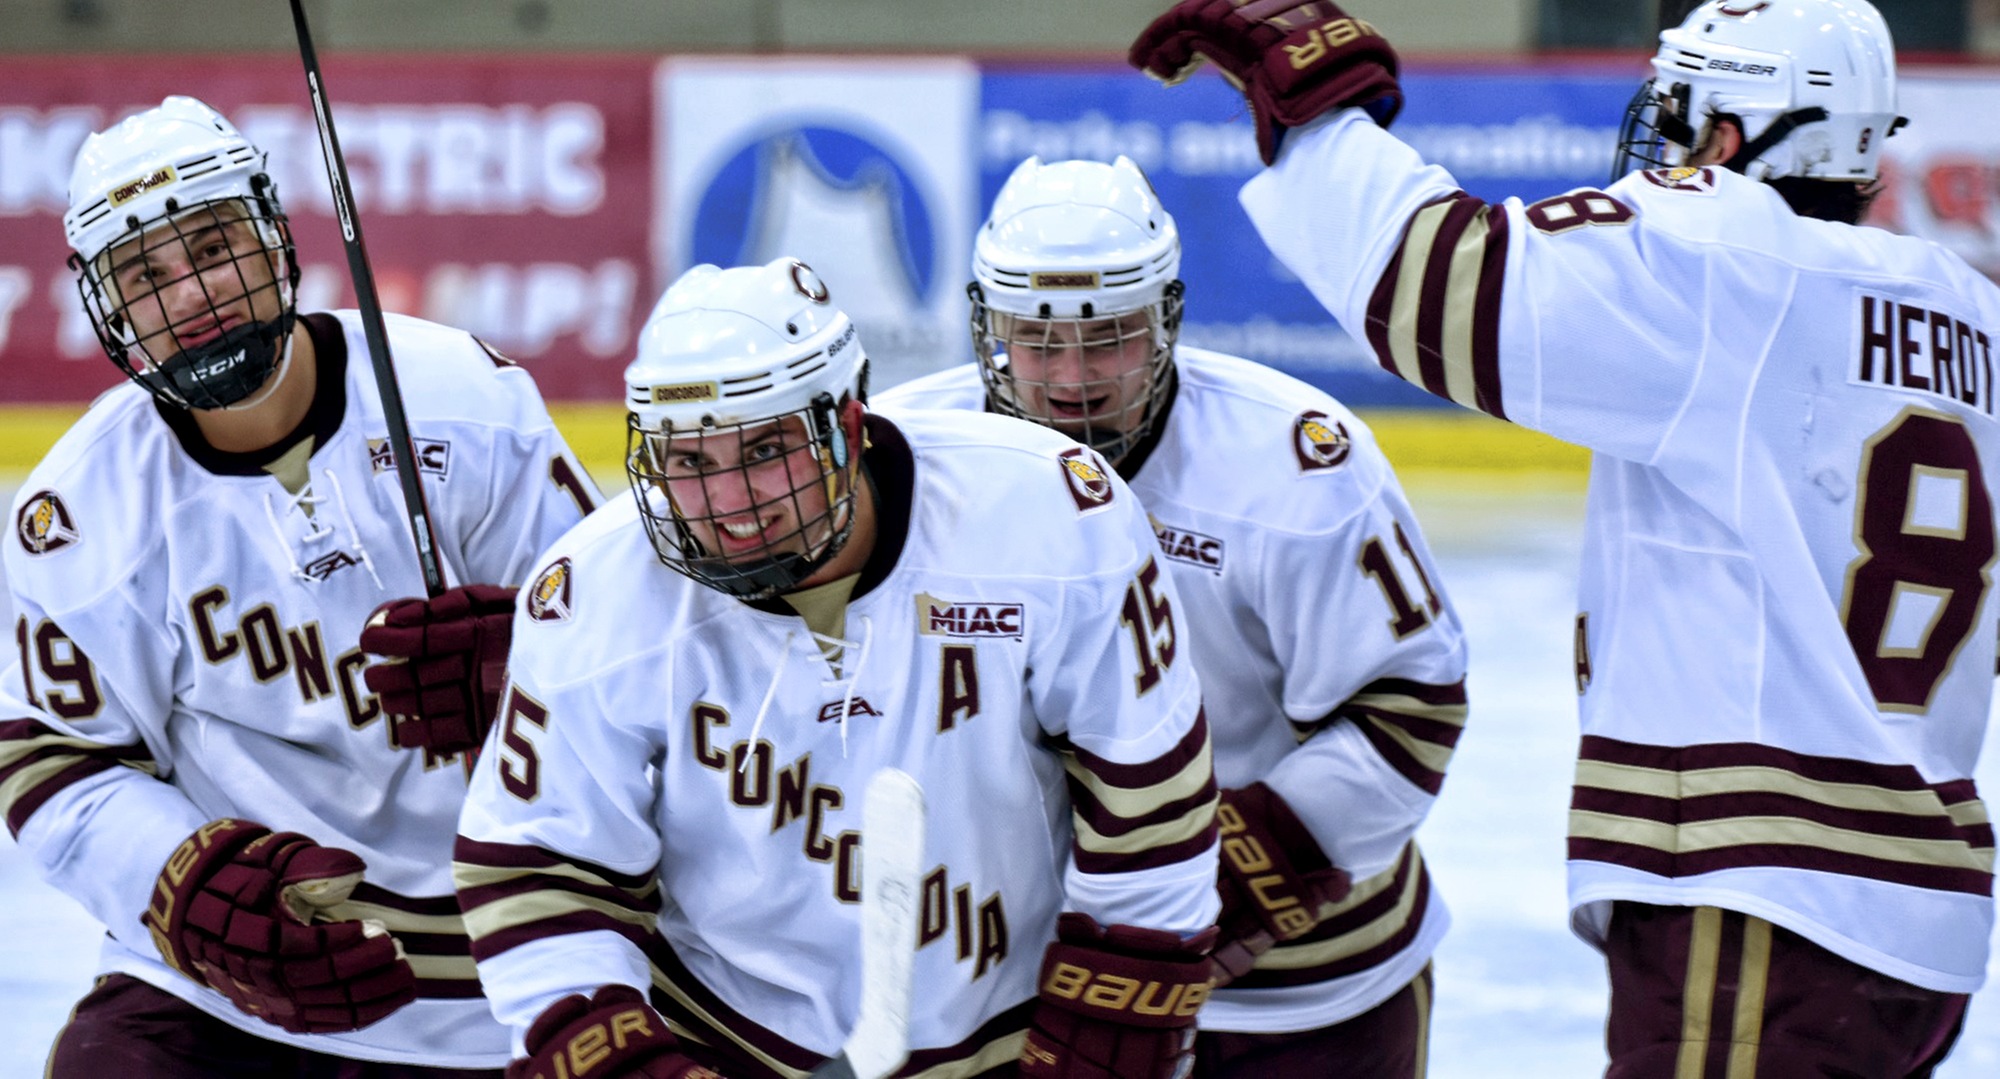 Senior Mario Bianchi and his linemates celebrate his goal in the third period of the Cobbers 5-2 win over Wis.-Superior.